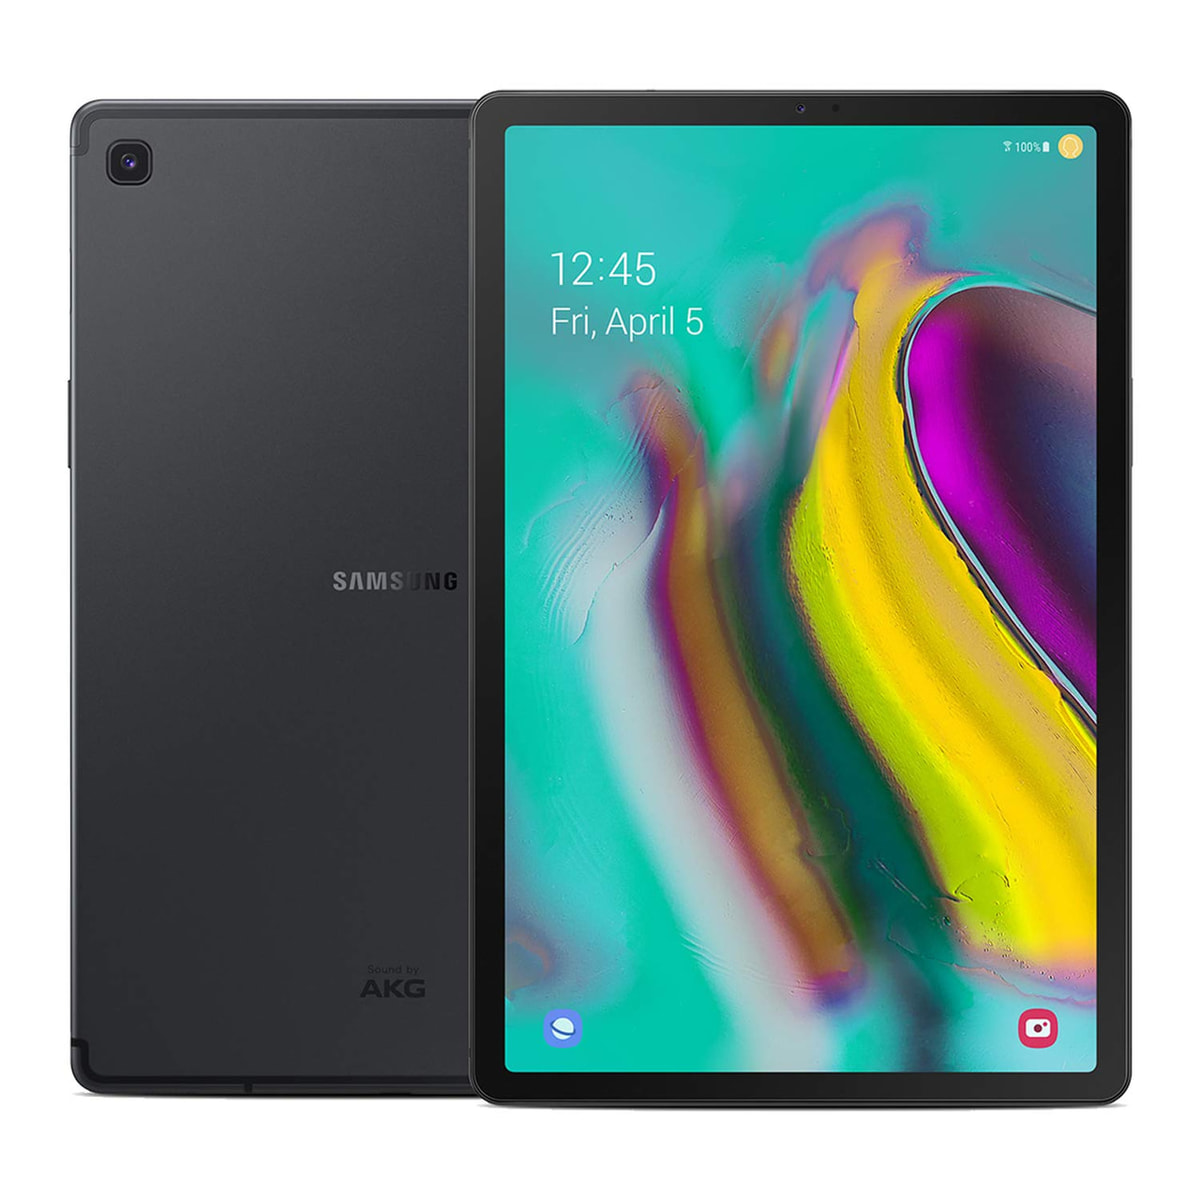 Galaxy Tab S5e」サムスンの10.5型Androidタブレット、同等サイズの他